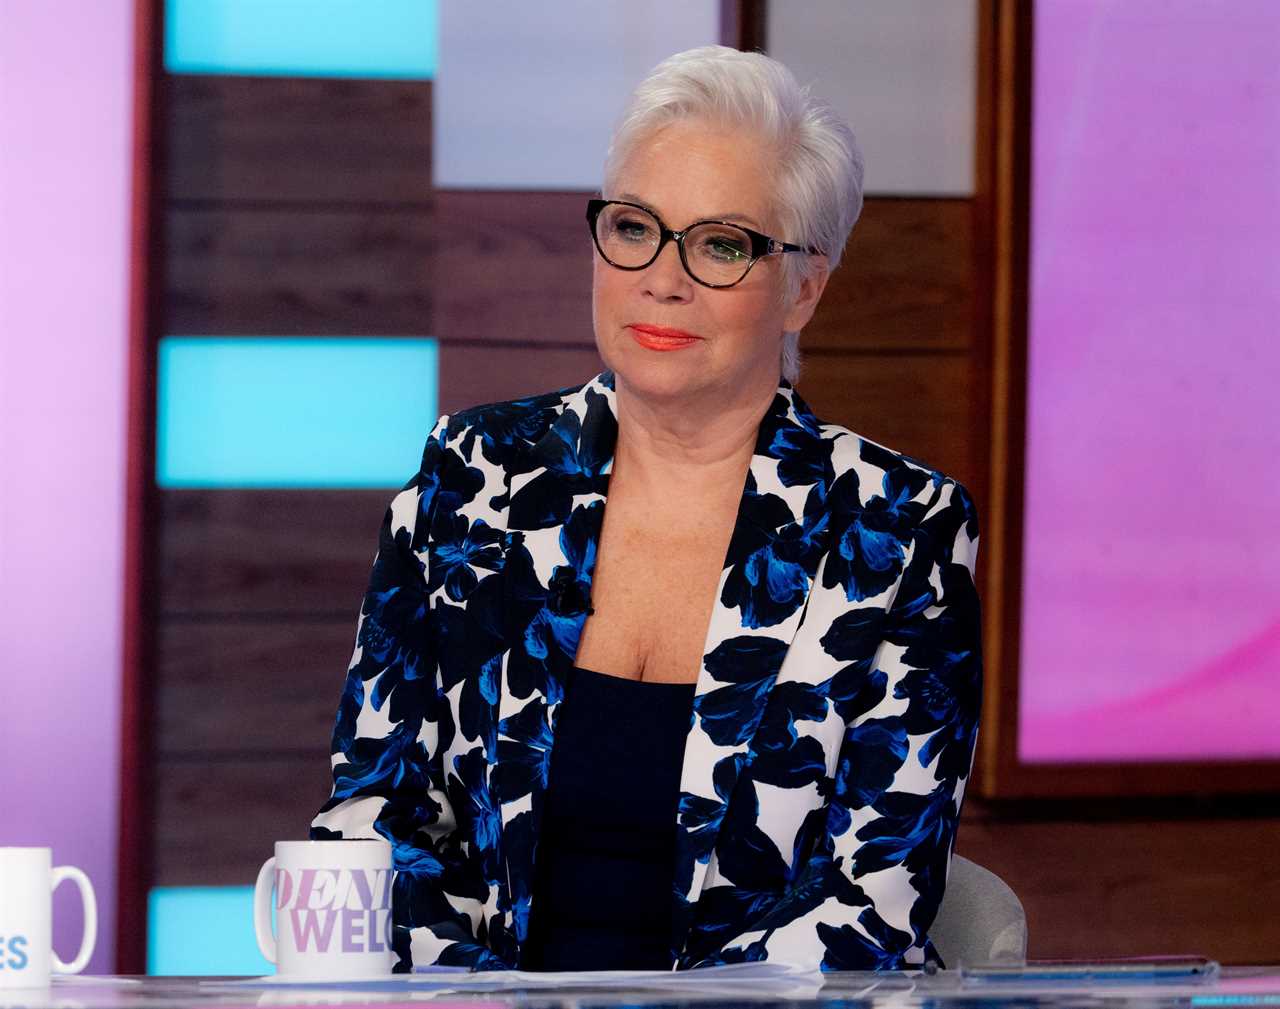 Loose Women faces backlash after Denise Welch's controversial interview